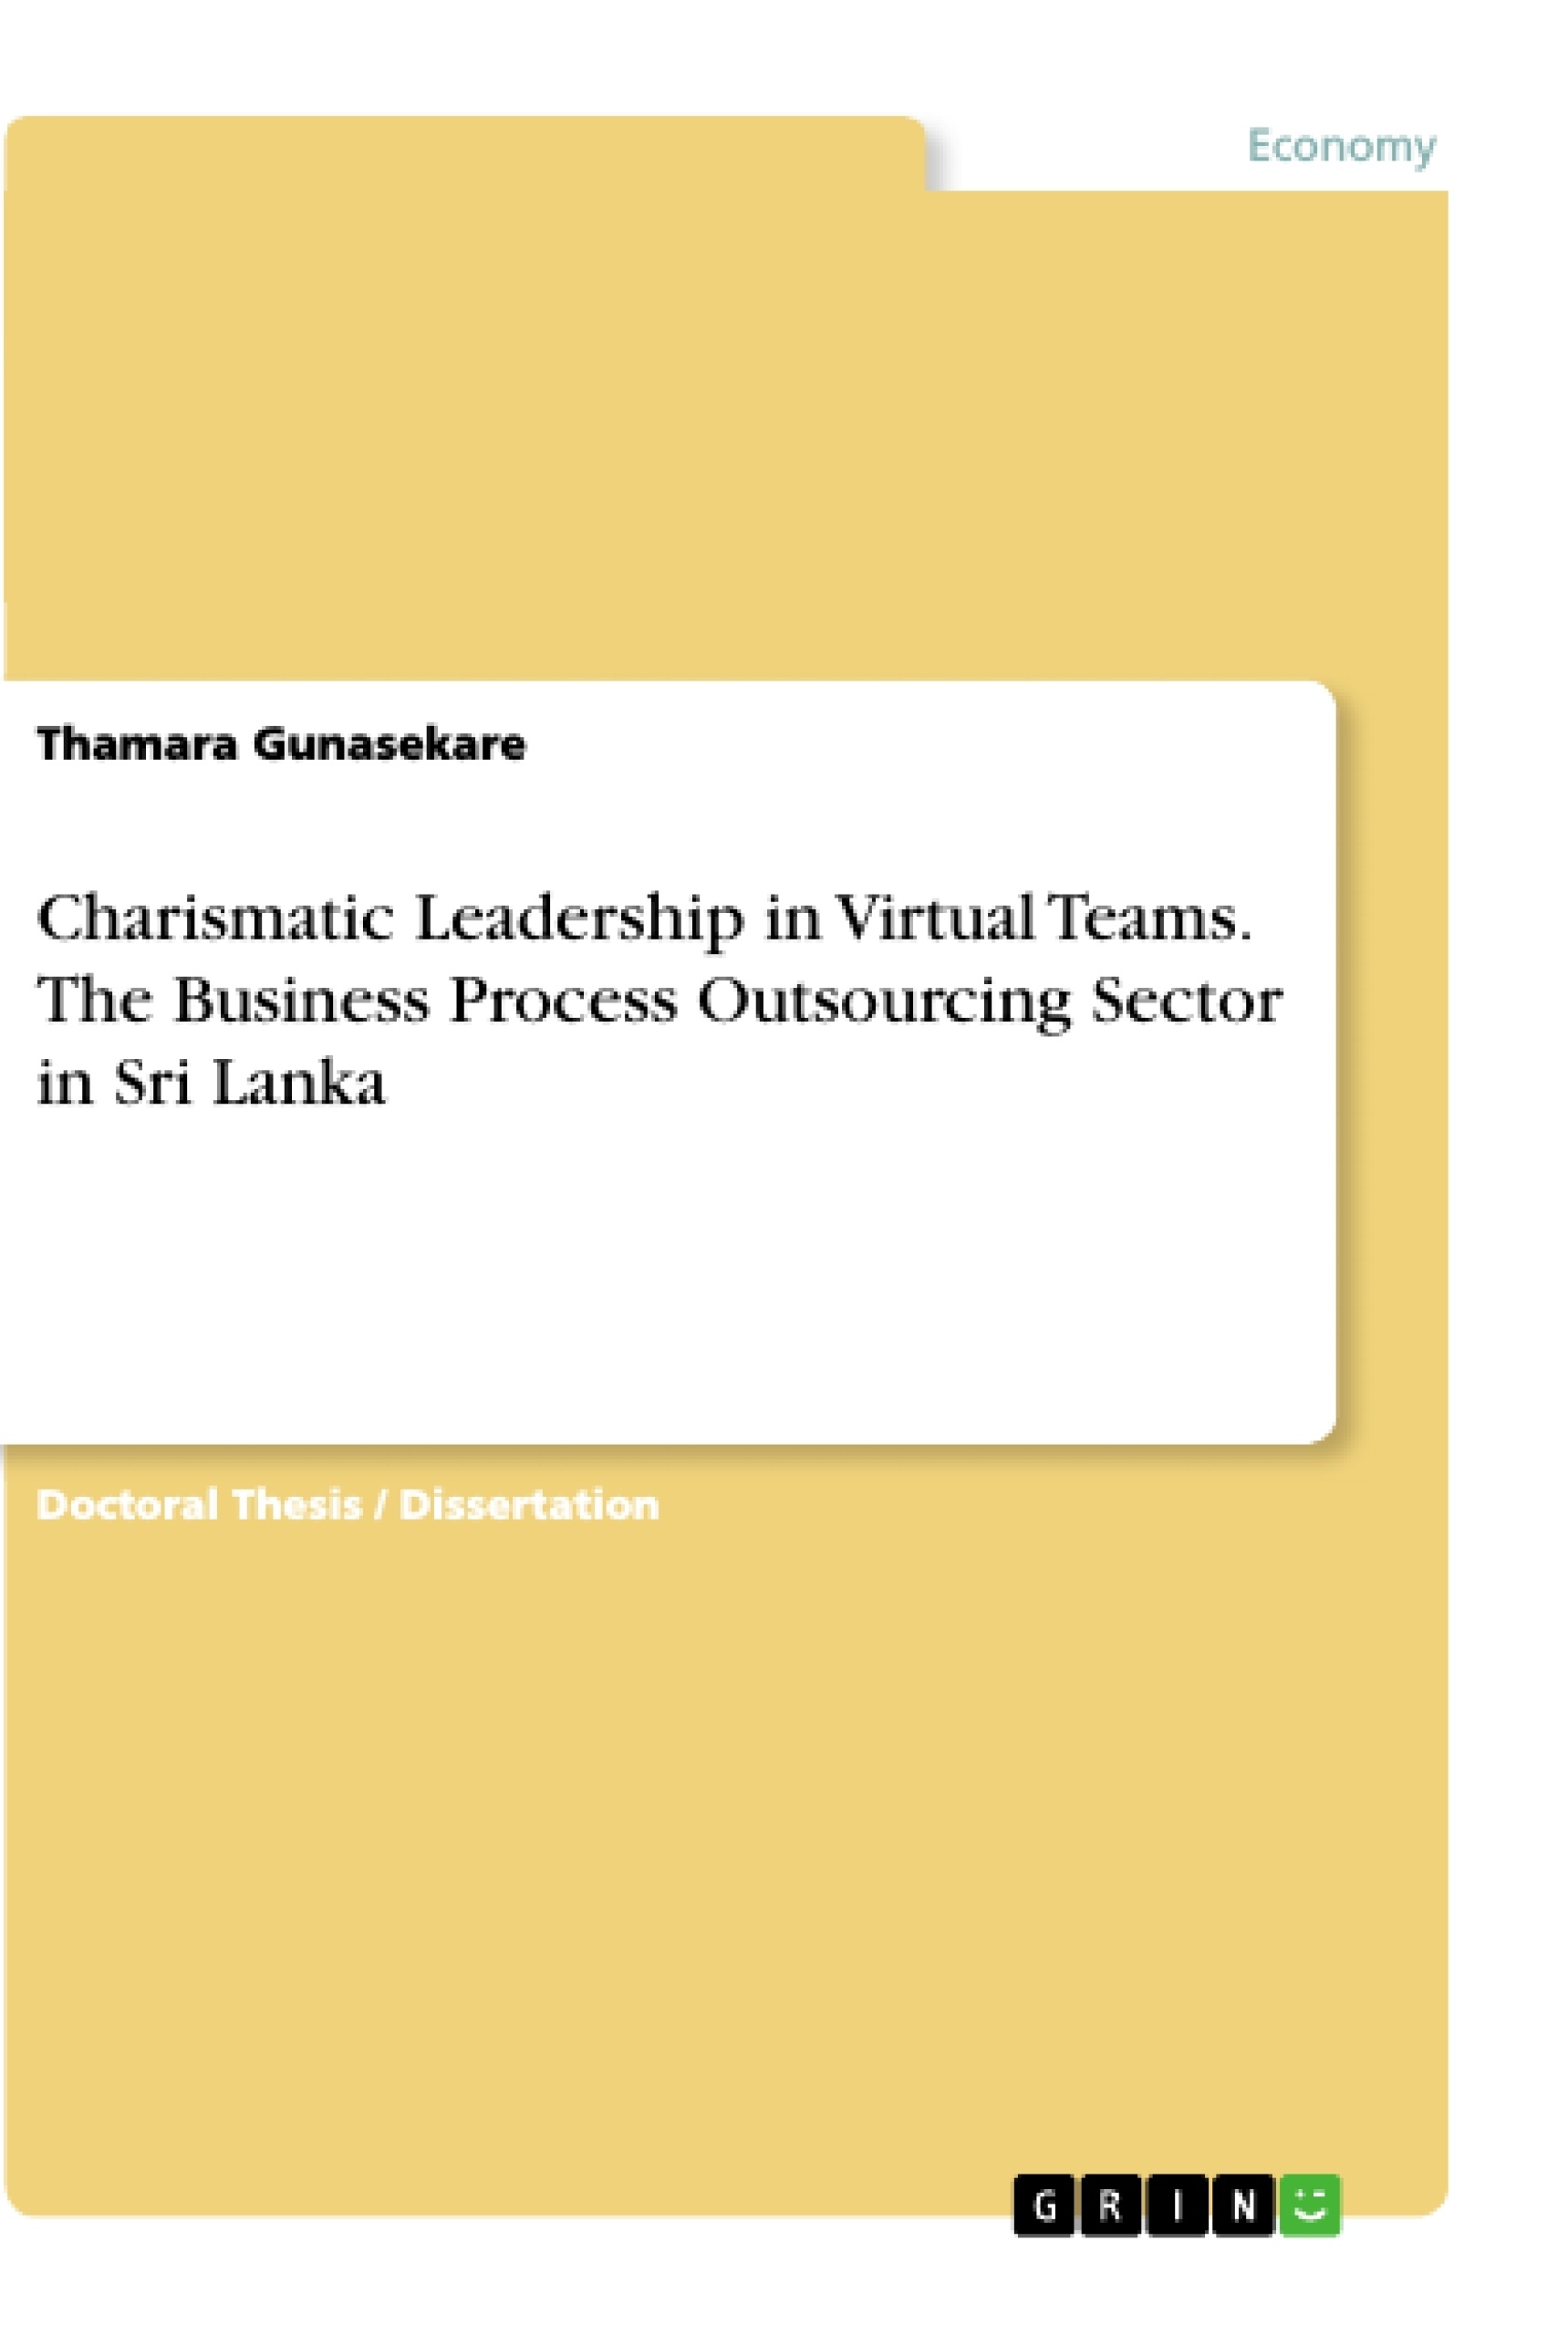 Title: Charismatic Leadership in Virtual Teams. The Business Process Outsourcing Sector in Sri Lanka